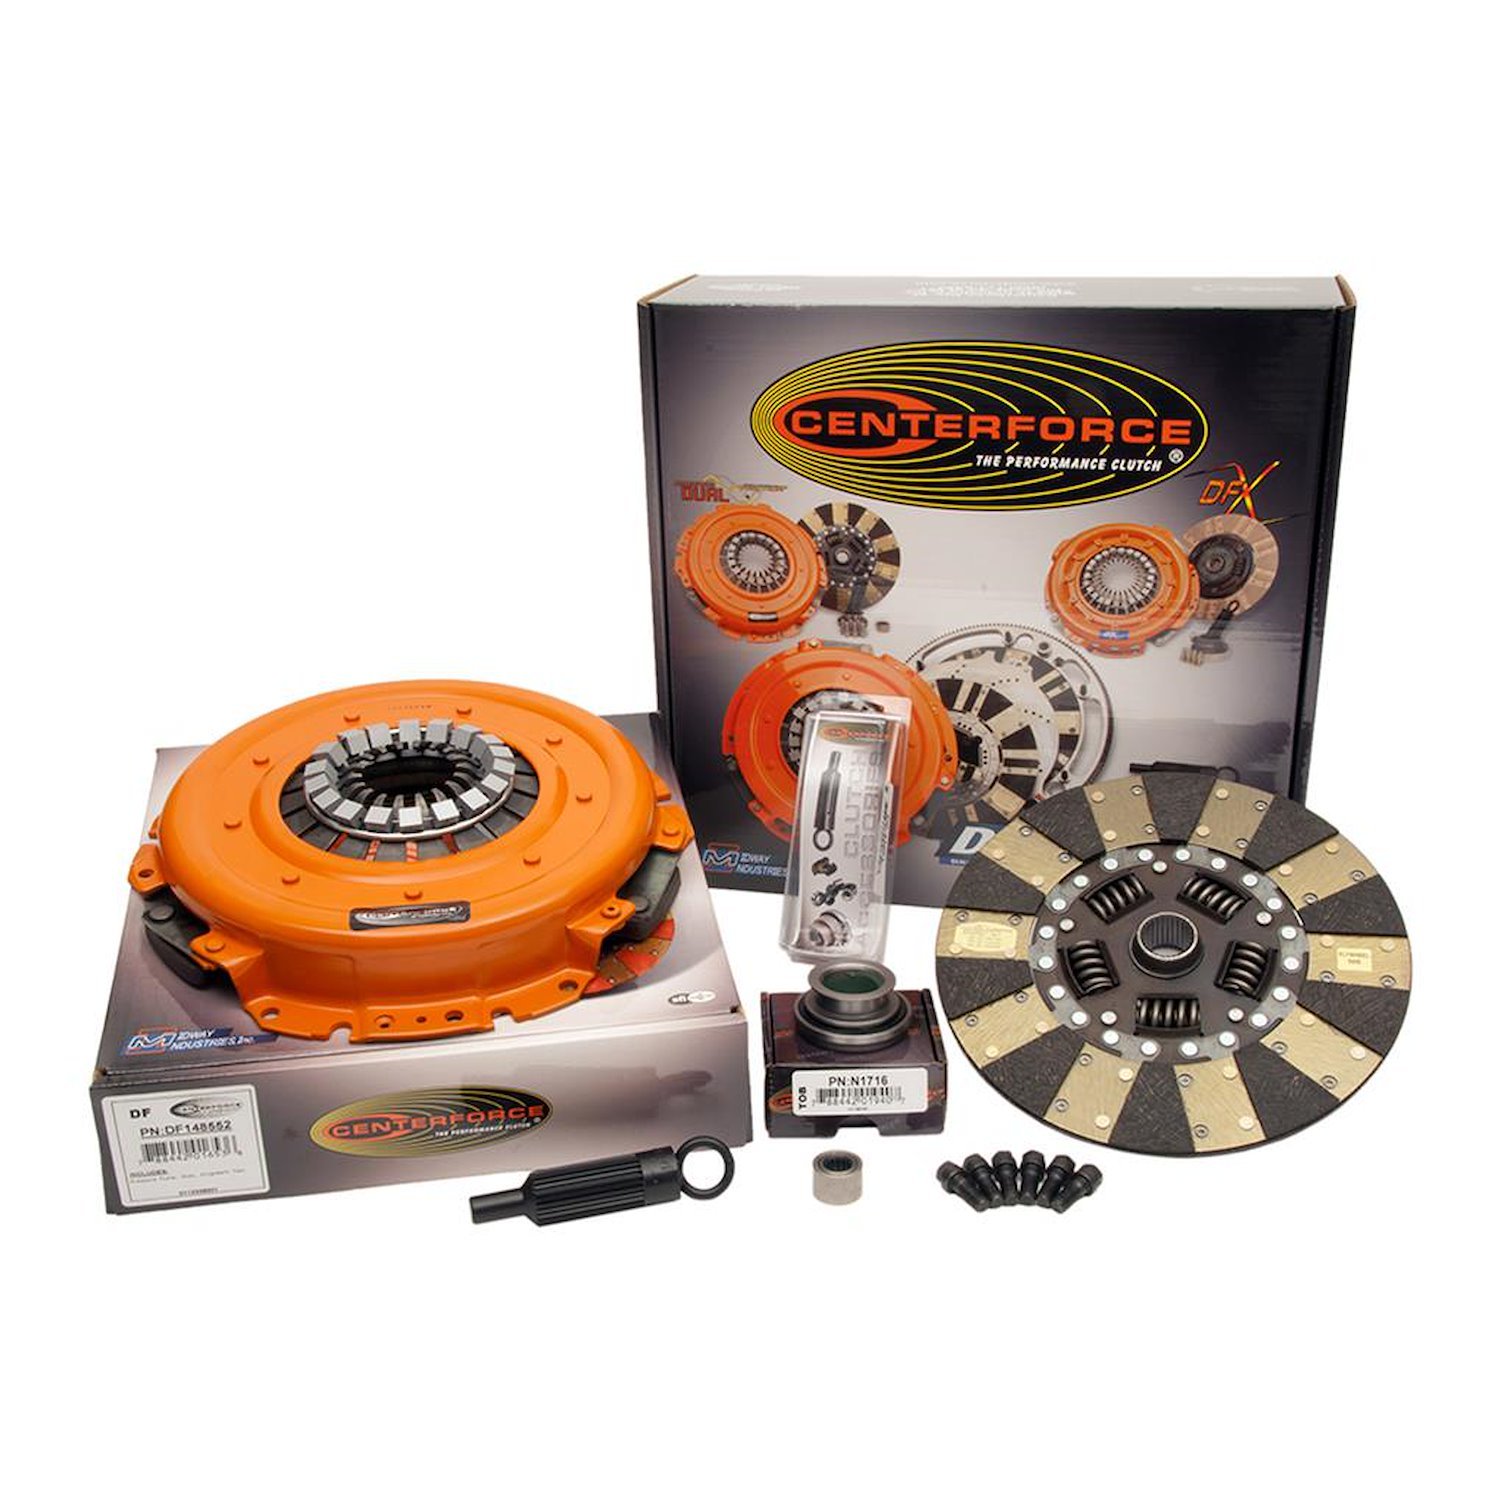 Dual Friction Clutch Kit Includes Pressure Plate, Disc, Alignment Tool, Throw Out Bearing, Pilot Bearing, Pressure Plate Bo